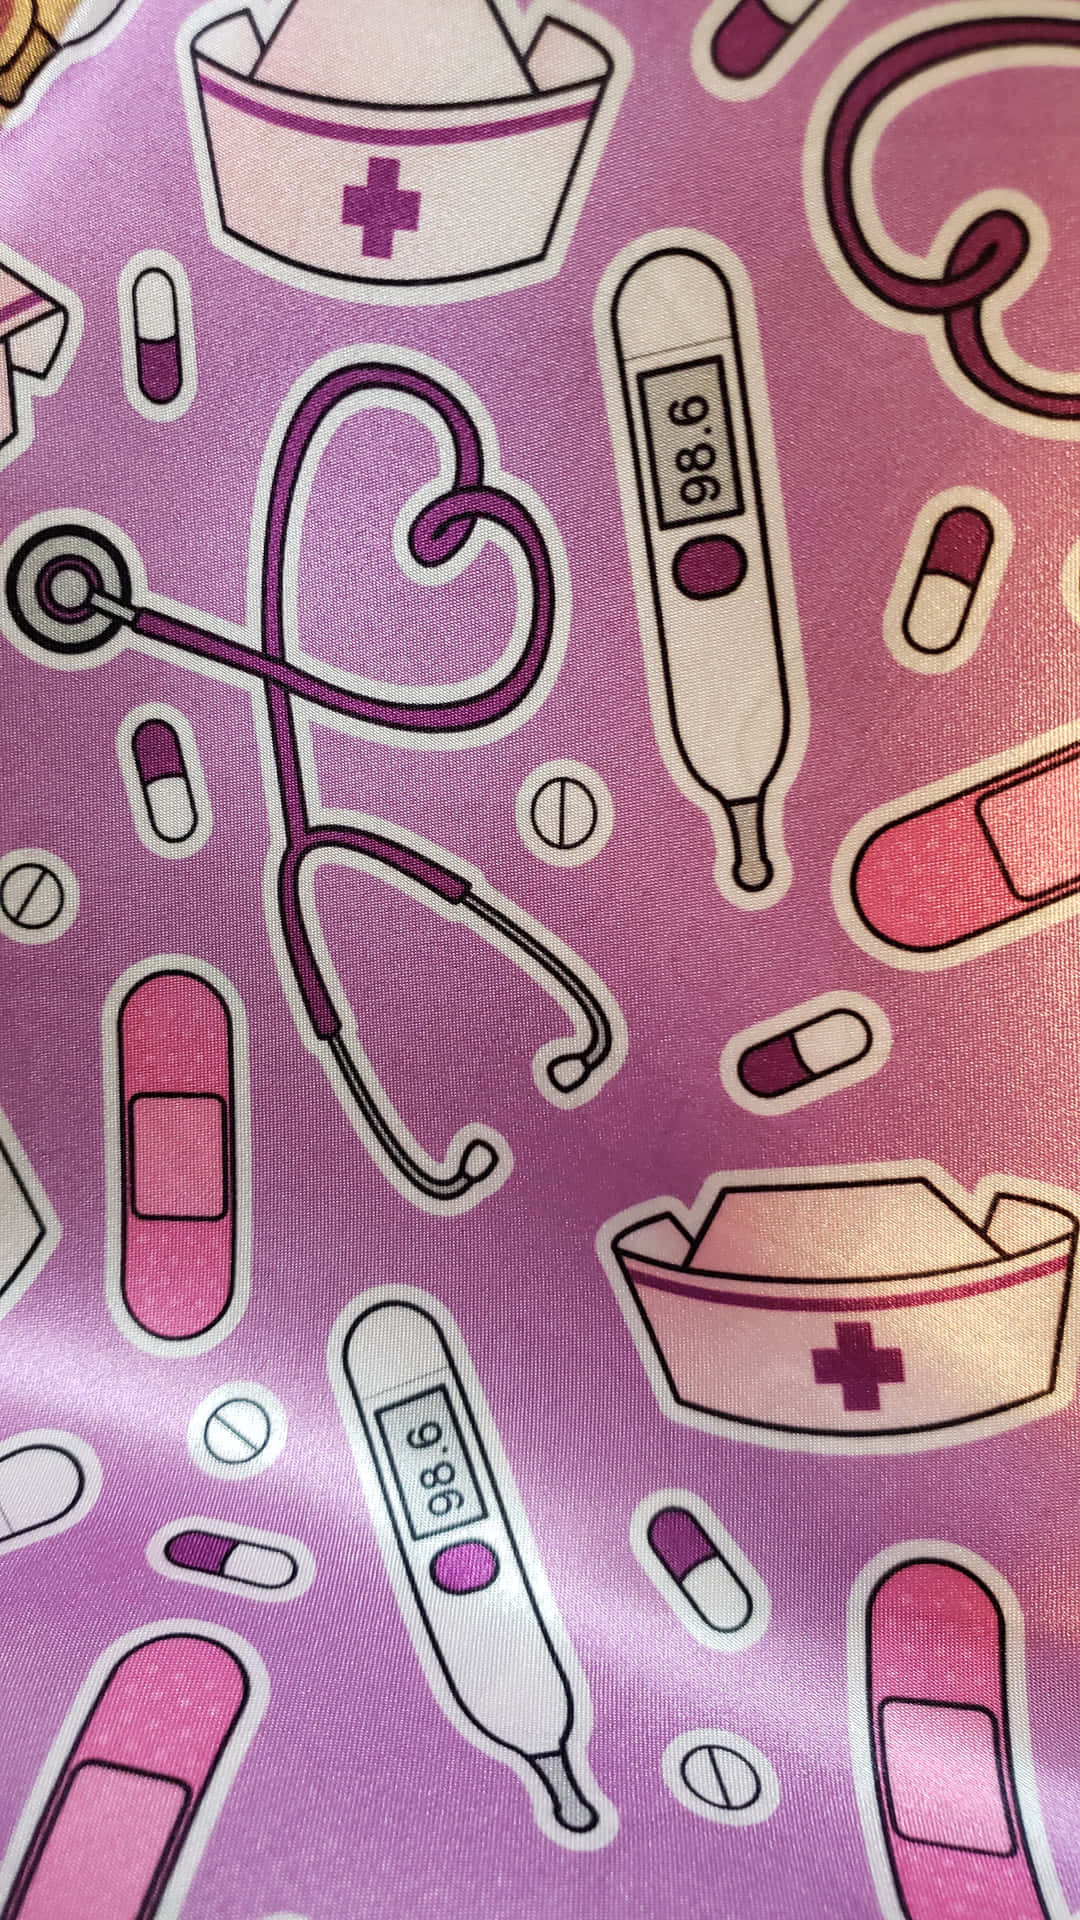 Download A Pink Fabric With A Nurse And Medicine On It Wallpaper